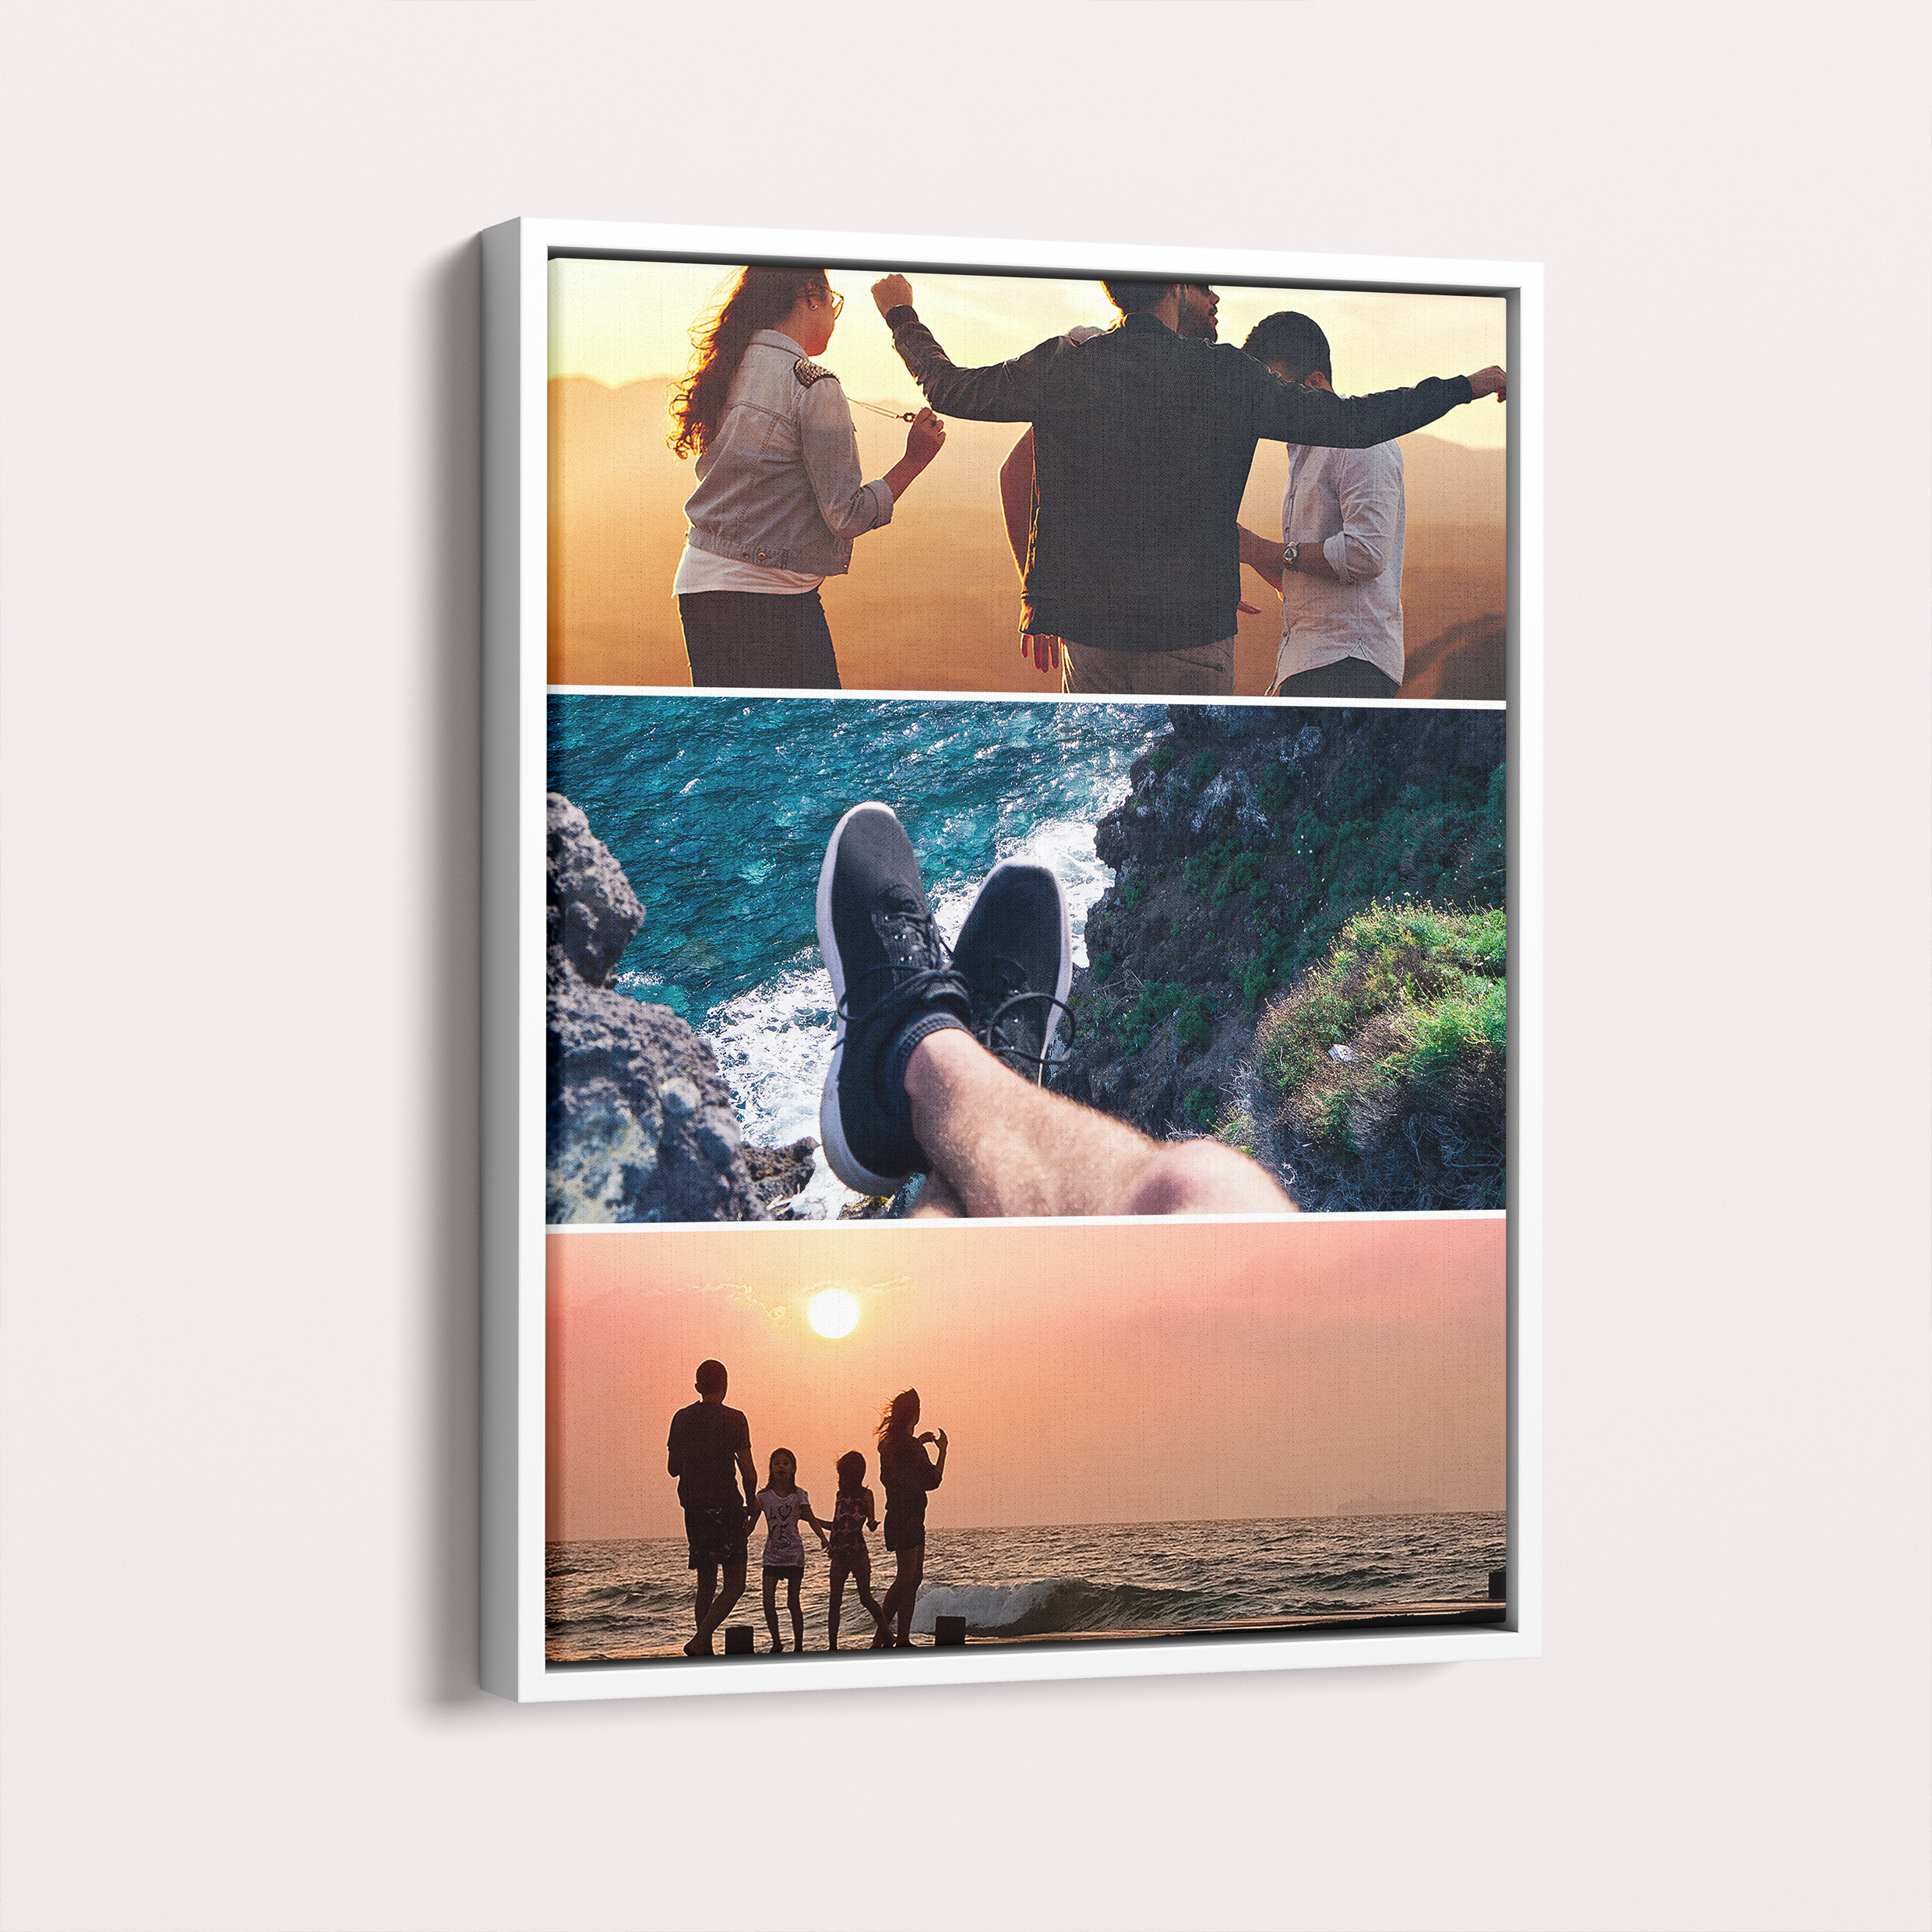 Unforgettable Holiday Framed Photo Canvases - Personalized Memories Display